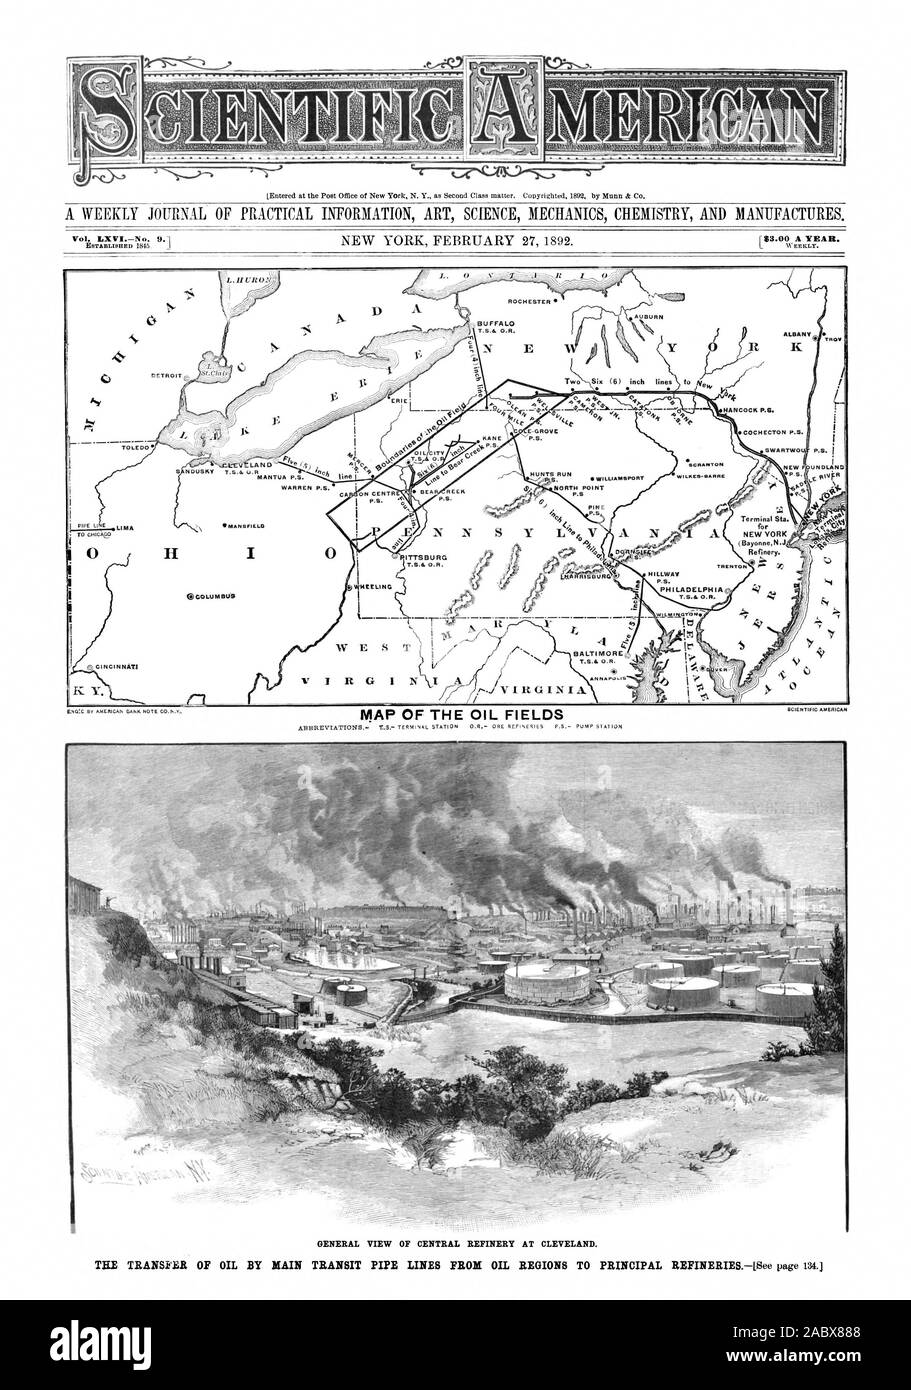 GENERAL VIEW OF CENTRAL REFINERY AT CLEVELAND. THE TRANSFER OF OIL BY MAIN TRANSIT PIPE LINES FROM OIL REGIONS TO PRINCIPAL REPINERIES[See page 134. ESTABLISHED 1845. WEEKLY. ROCHESTER AUBURN BUFFAL ALBANY  TROY HANCOCK P.S. GROVE COCHECTON P.S. SWARTWO P.S . I SCRANTON NEW UNDLAND `. PINE for c  Se'5 BURG  HILL WAY PIPE LI E HEELING MAP OF THE OIL FIELDS PHILADELPHIA ENG:C Sr AMERICAN GAM( NOTE COST TOLEDO  SCIENTIFIC AMERICAN, 1892-02-27 Stock Photo